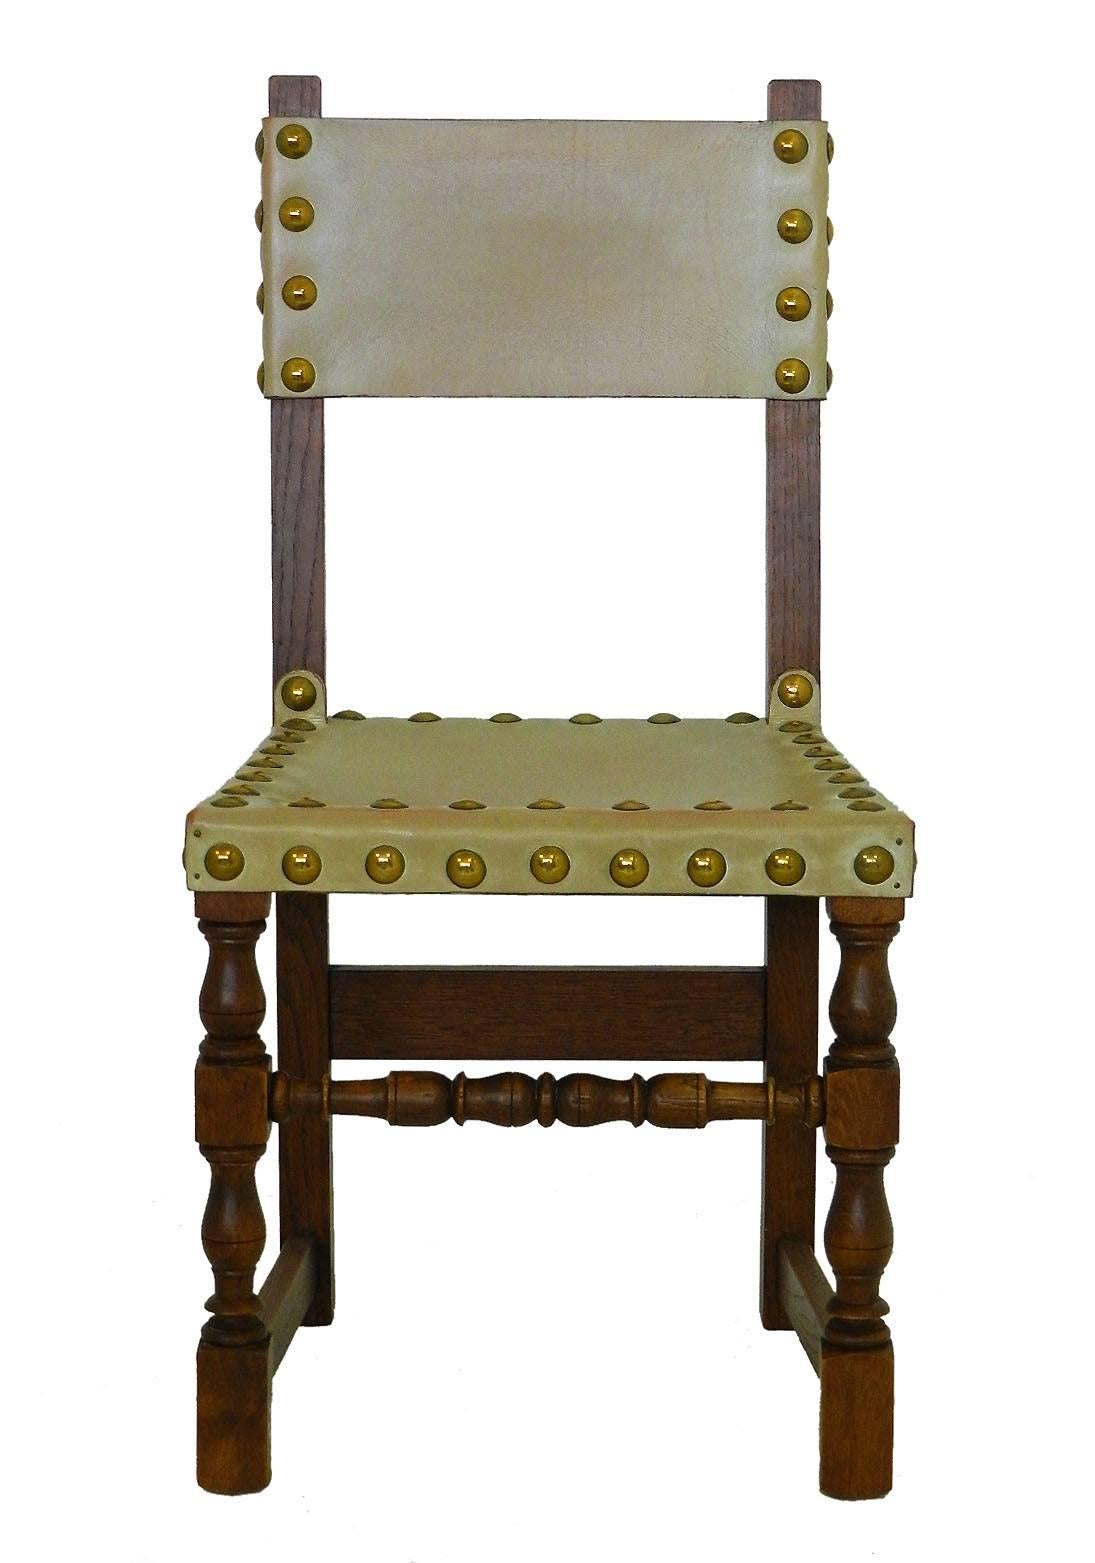 Six dining chairs vintage 20th century Spanish leather brass studs oak
Handsome set of six chairs
Pale stone leather
Chunky brass studs
Very good condition with minor signs of use.
Free Shipping Options available 
We will always do our best to offer